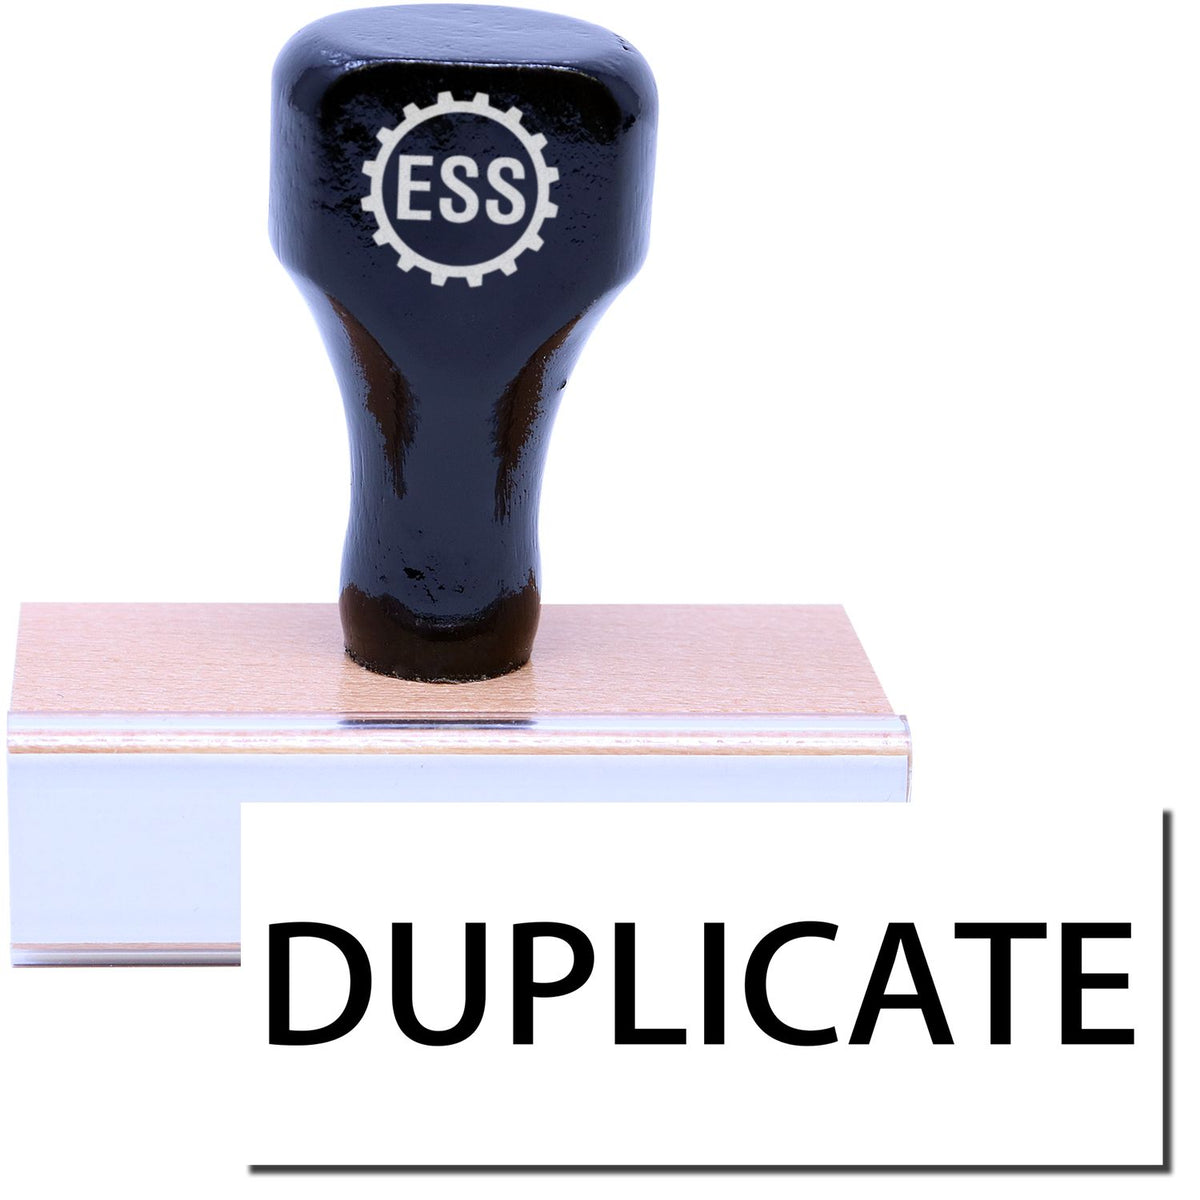 A stock office rubber stamp with a stamped image showing how the text &quot;DUPLICATE&quot; is displayed after stamping.